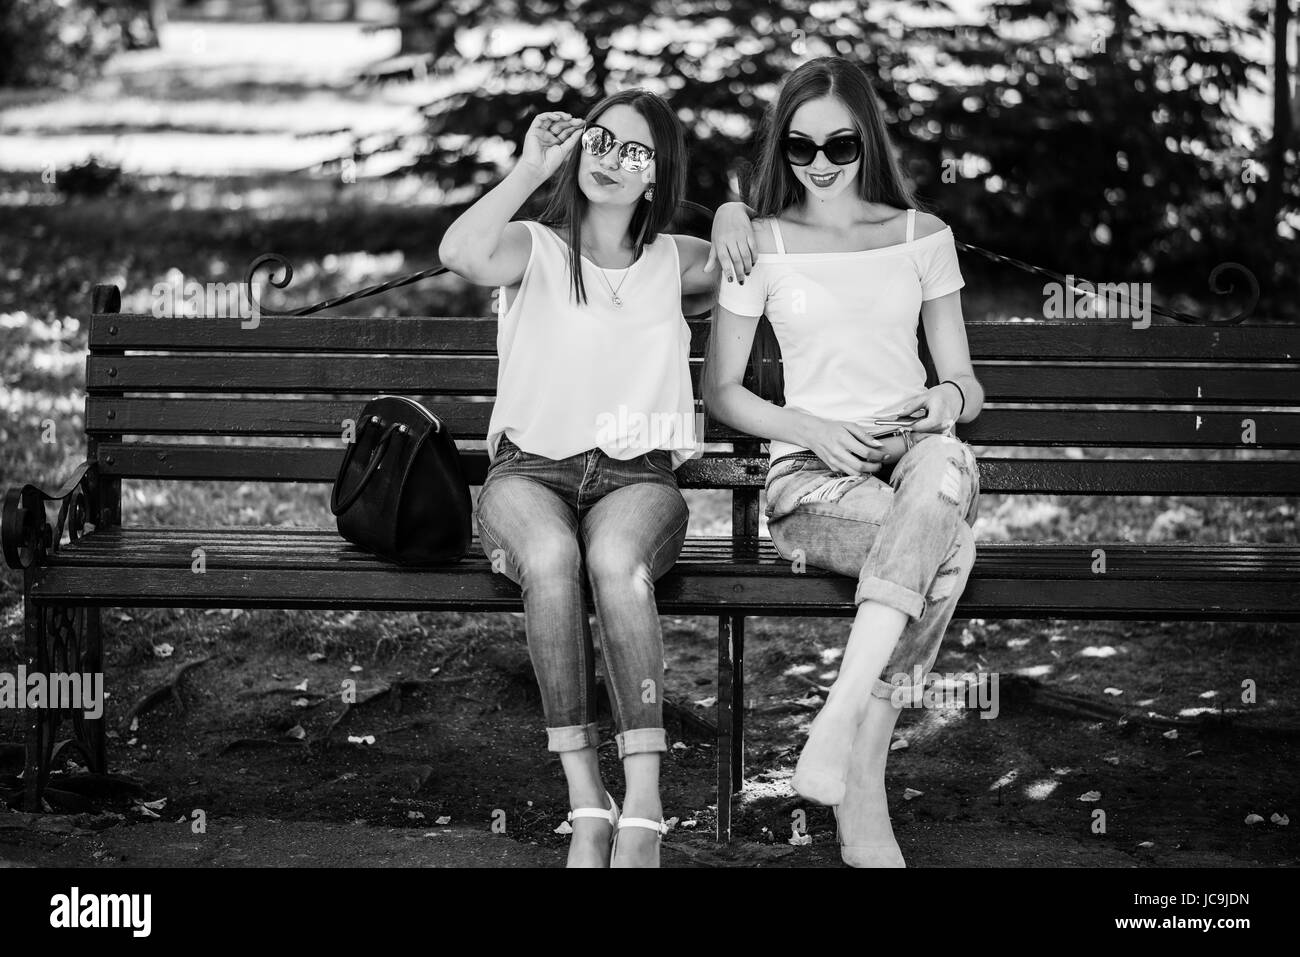 Two fabulous girls sitting on the bench in the park. Black and white photo. Stock Photo